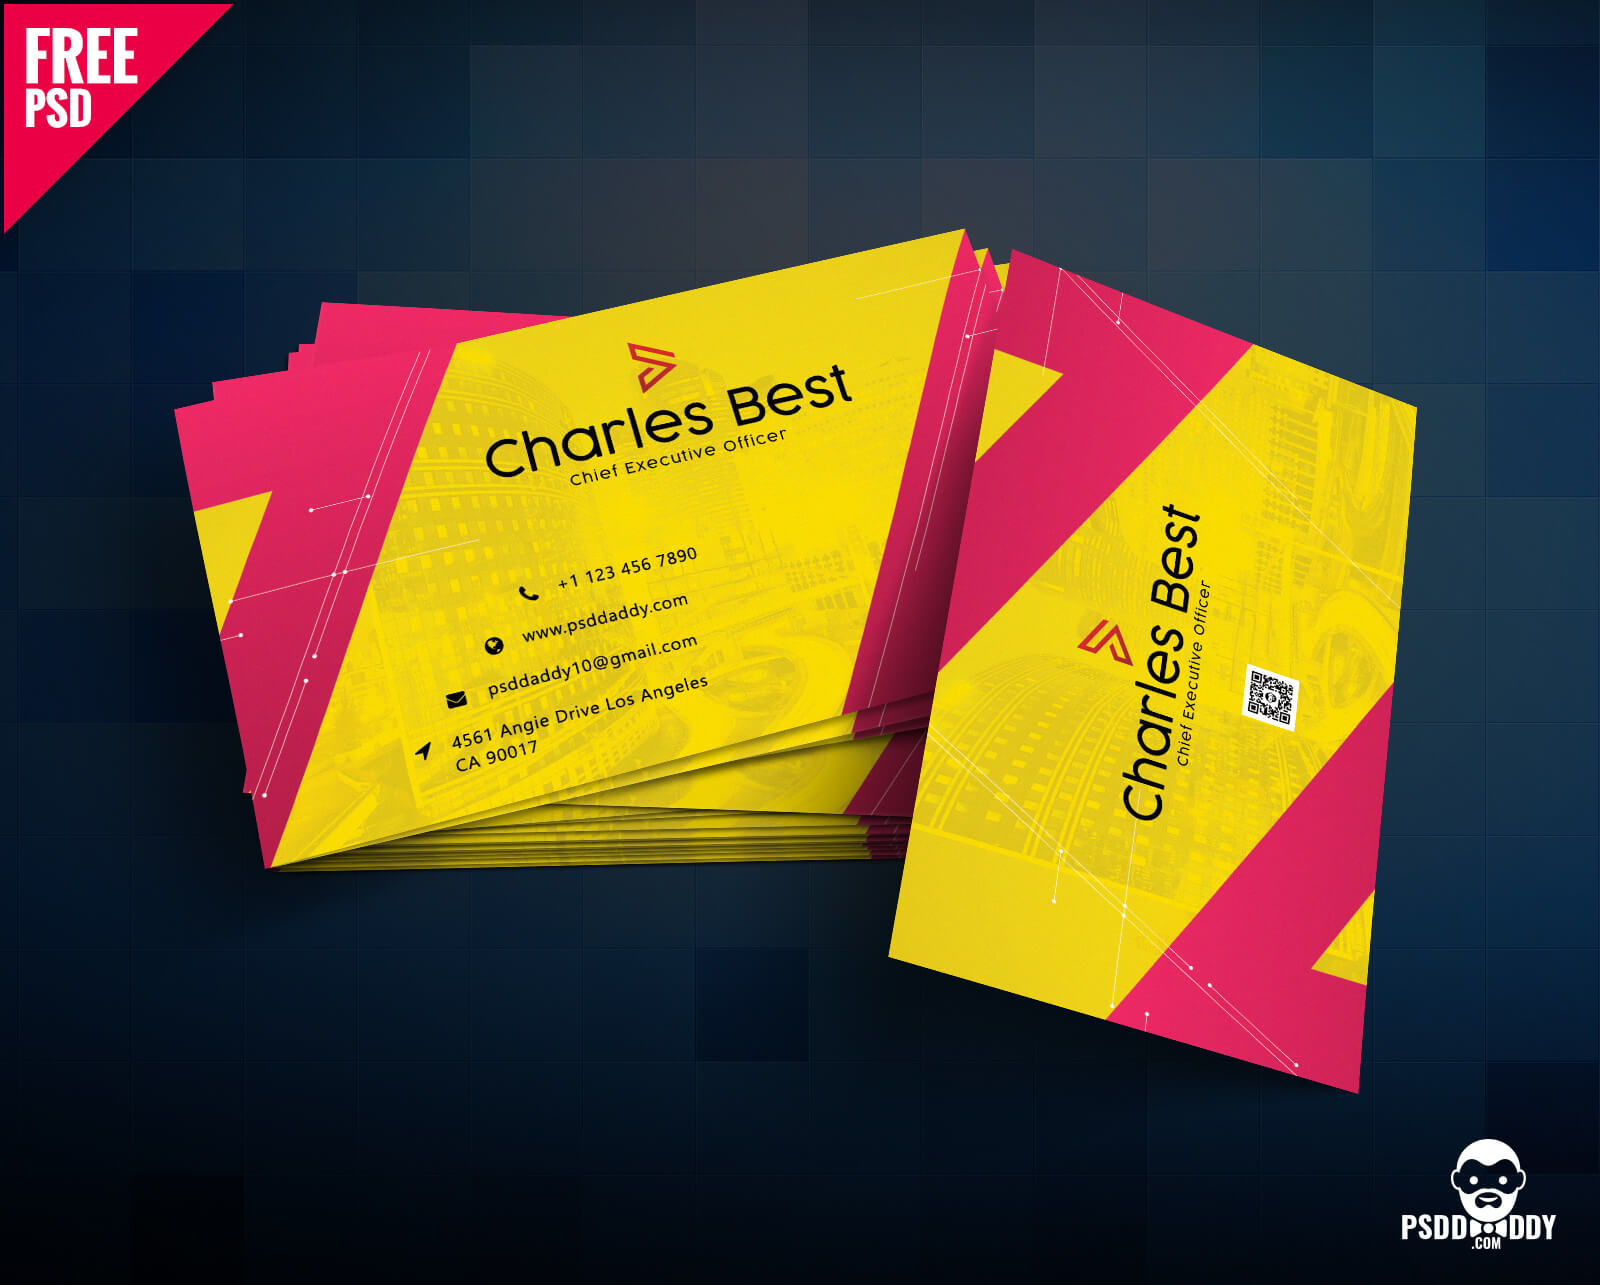 Download] Creative Business Card Free Psd | Psddaddy With Business Card Size Template Psd